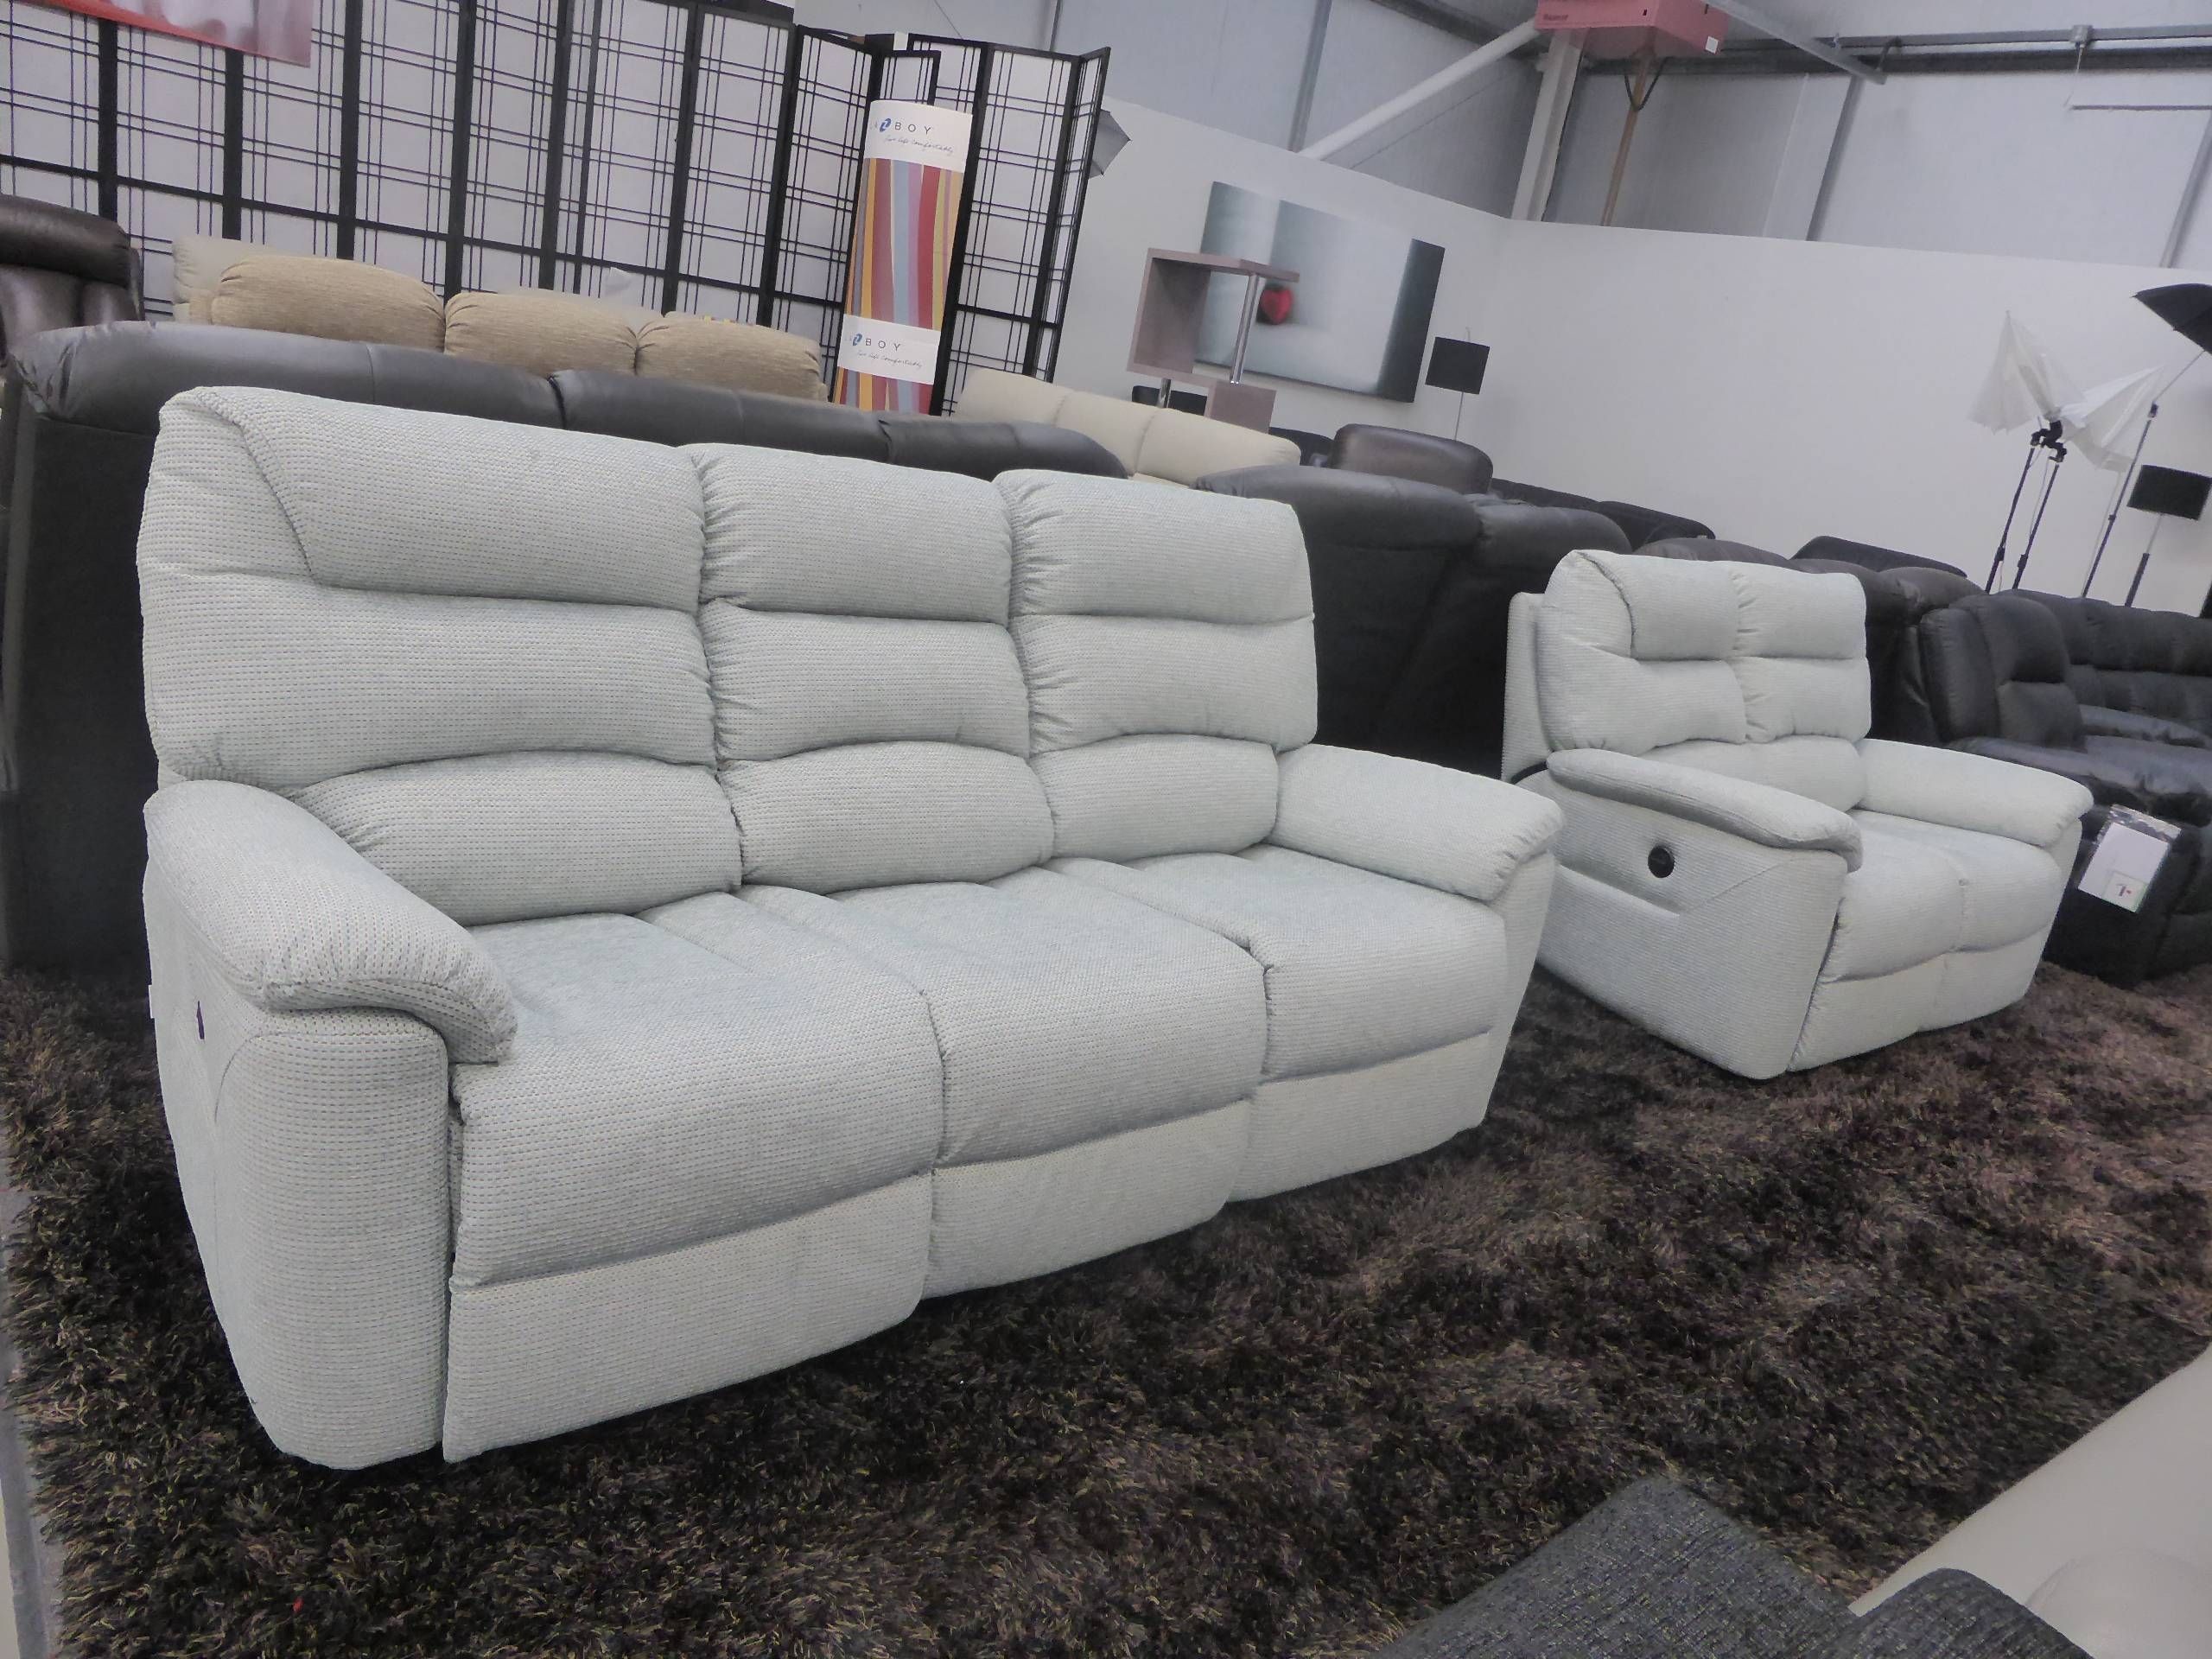 Lazyboy Sofa And Bed Gallery | Furnimax Brands Outlet Throughout Lazy Boy Manhattan Sofas (View 11 of 15)